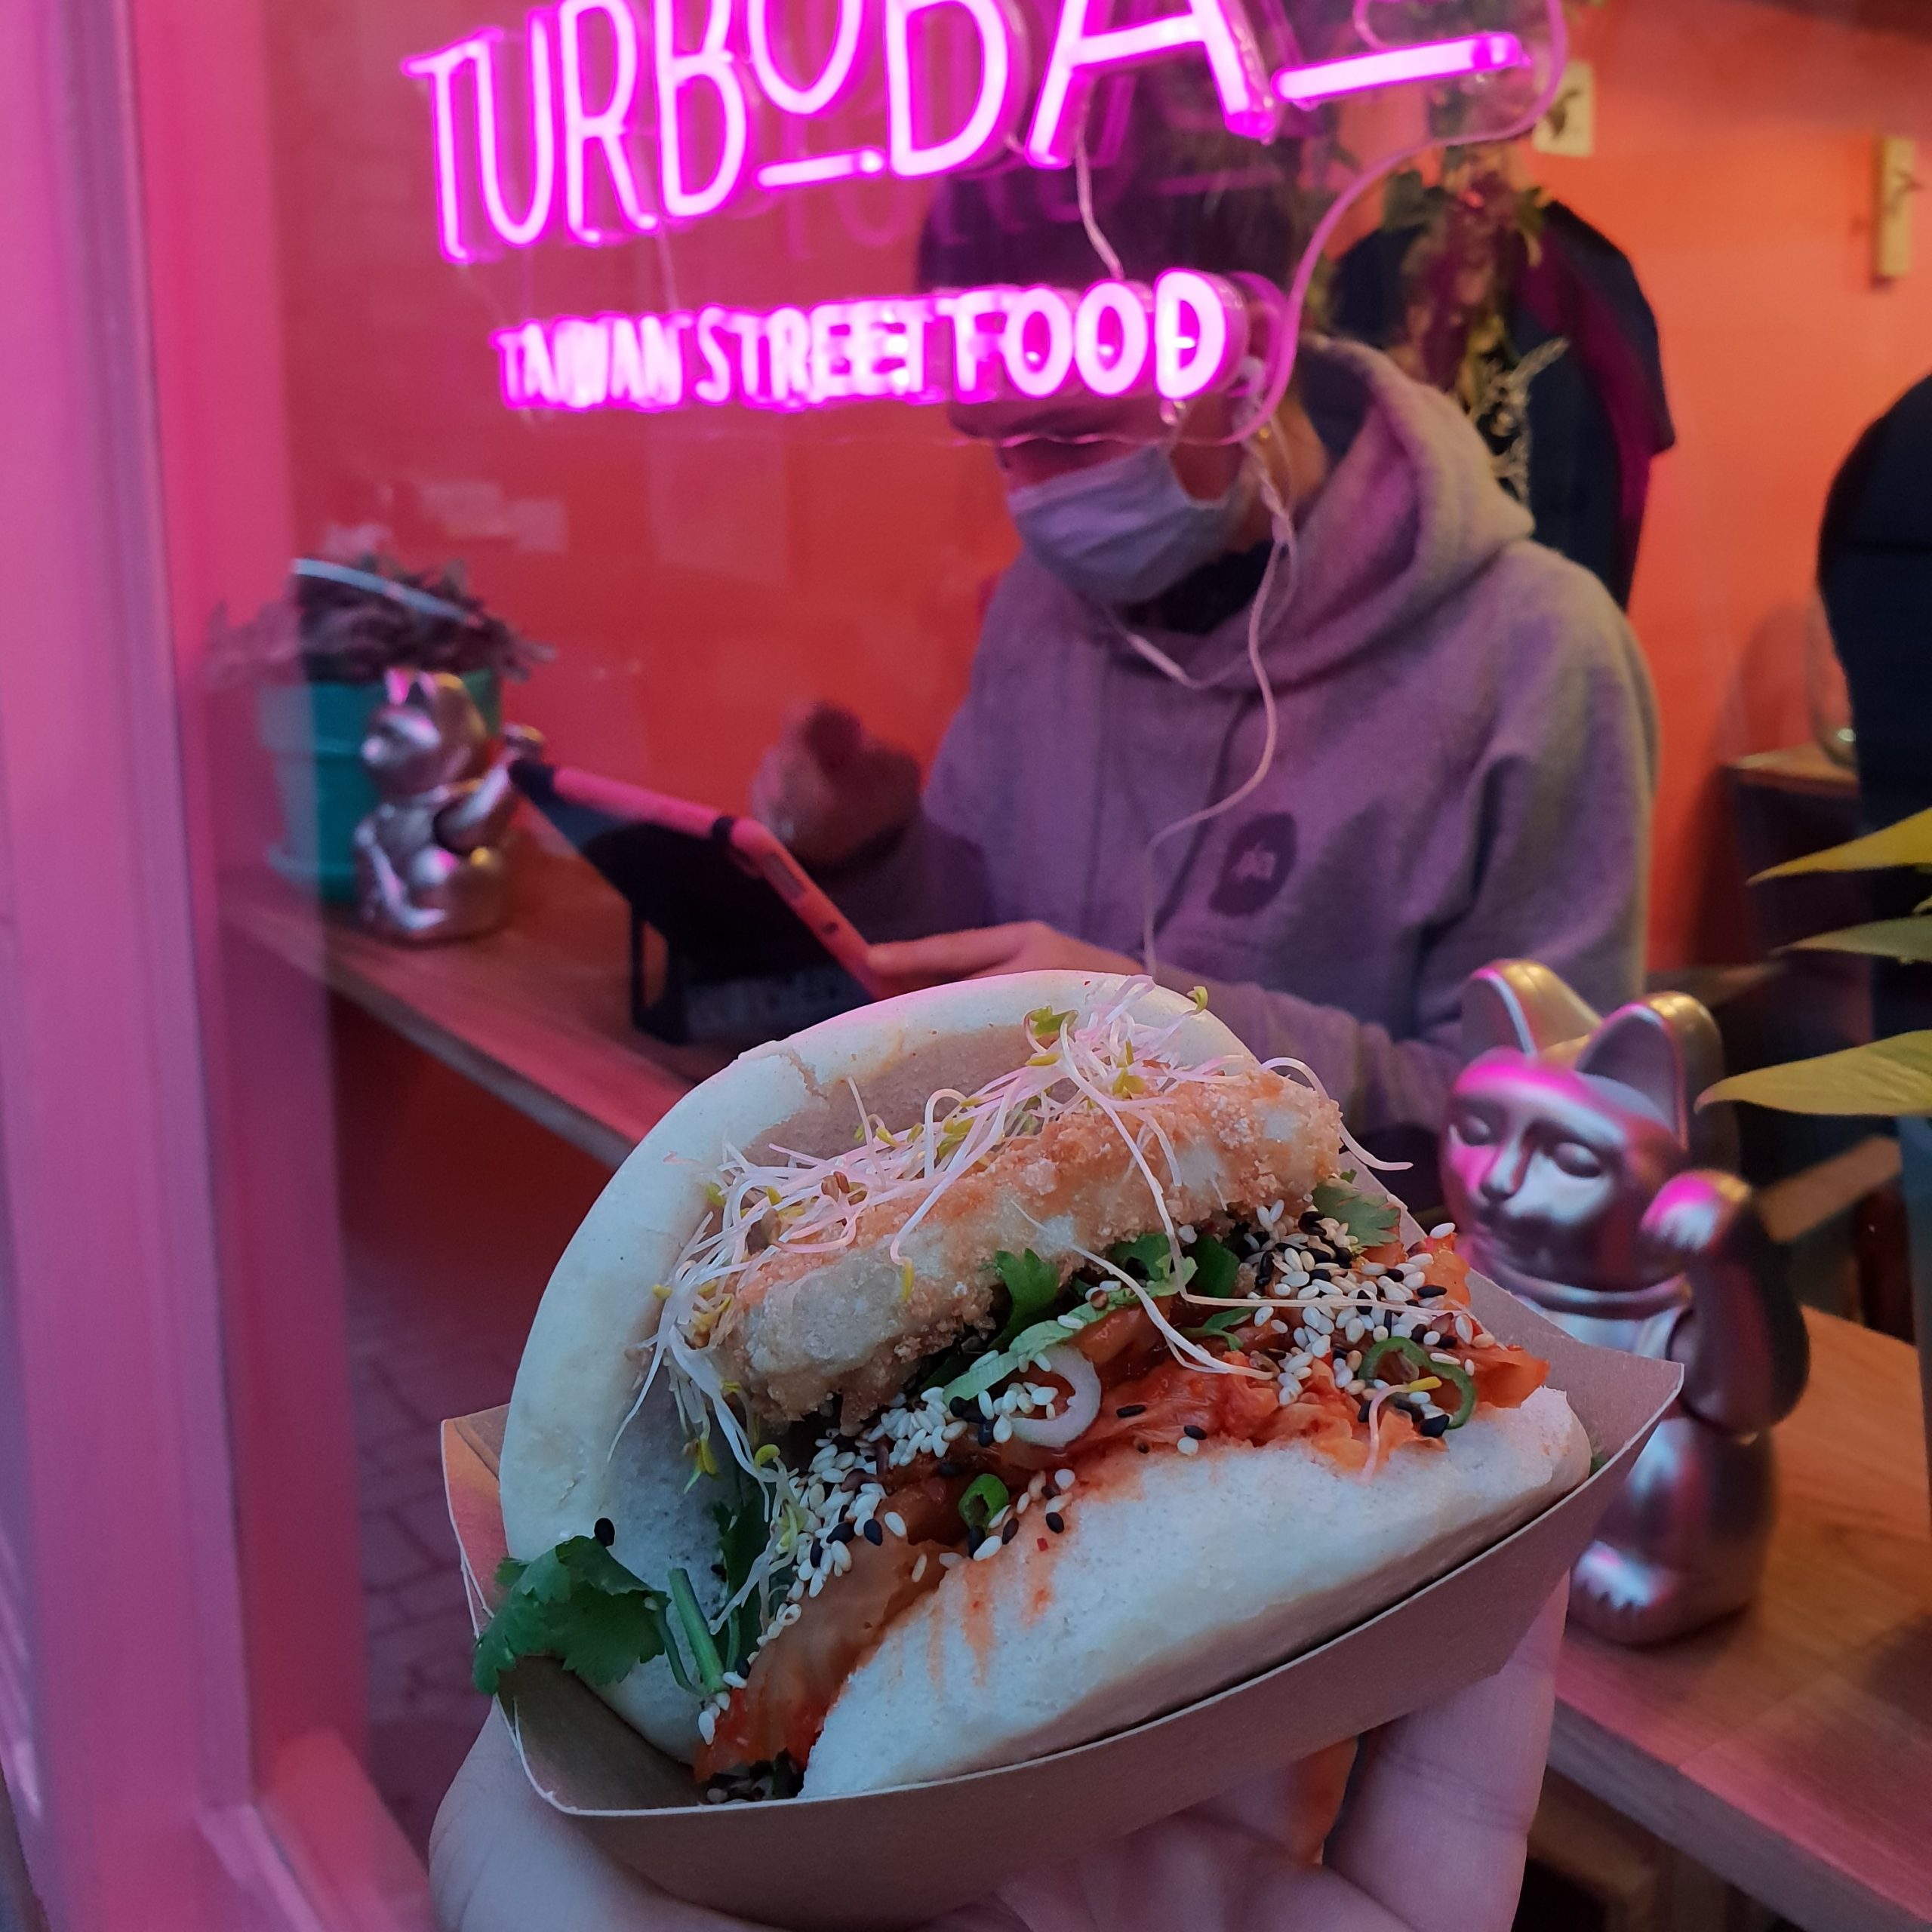 guabao streetfood strasbourg turbobao scaled - Accueil